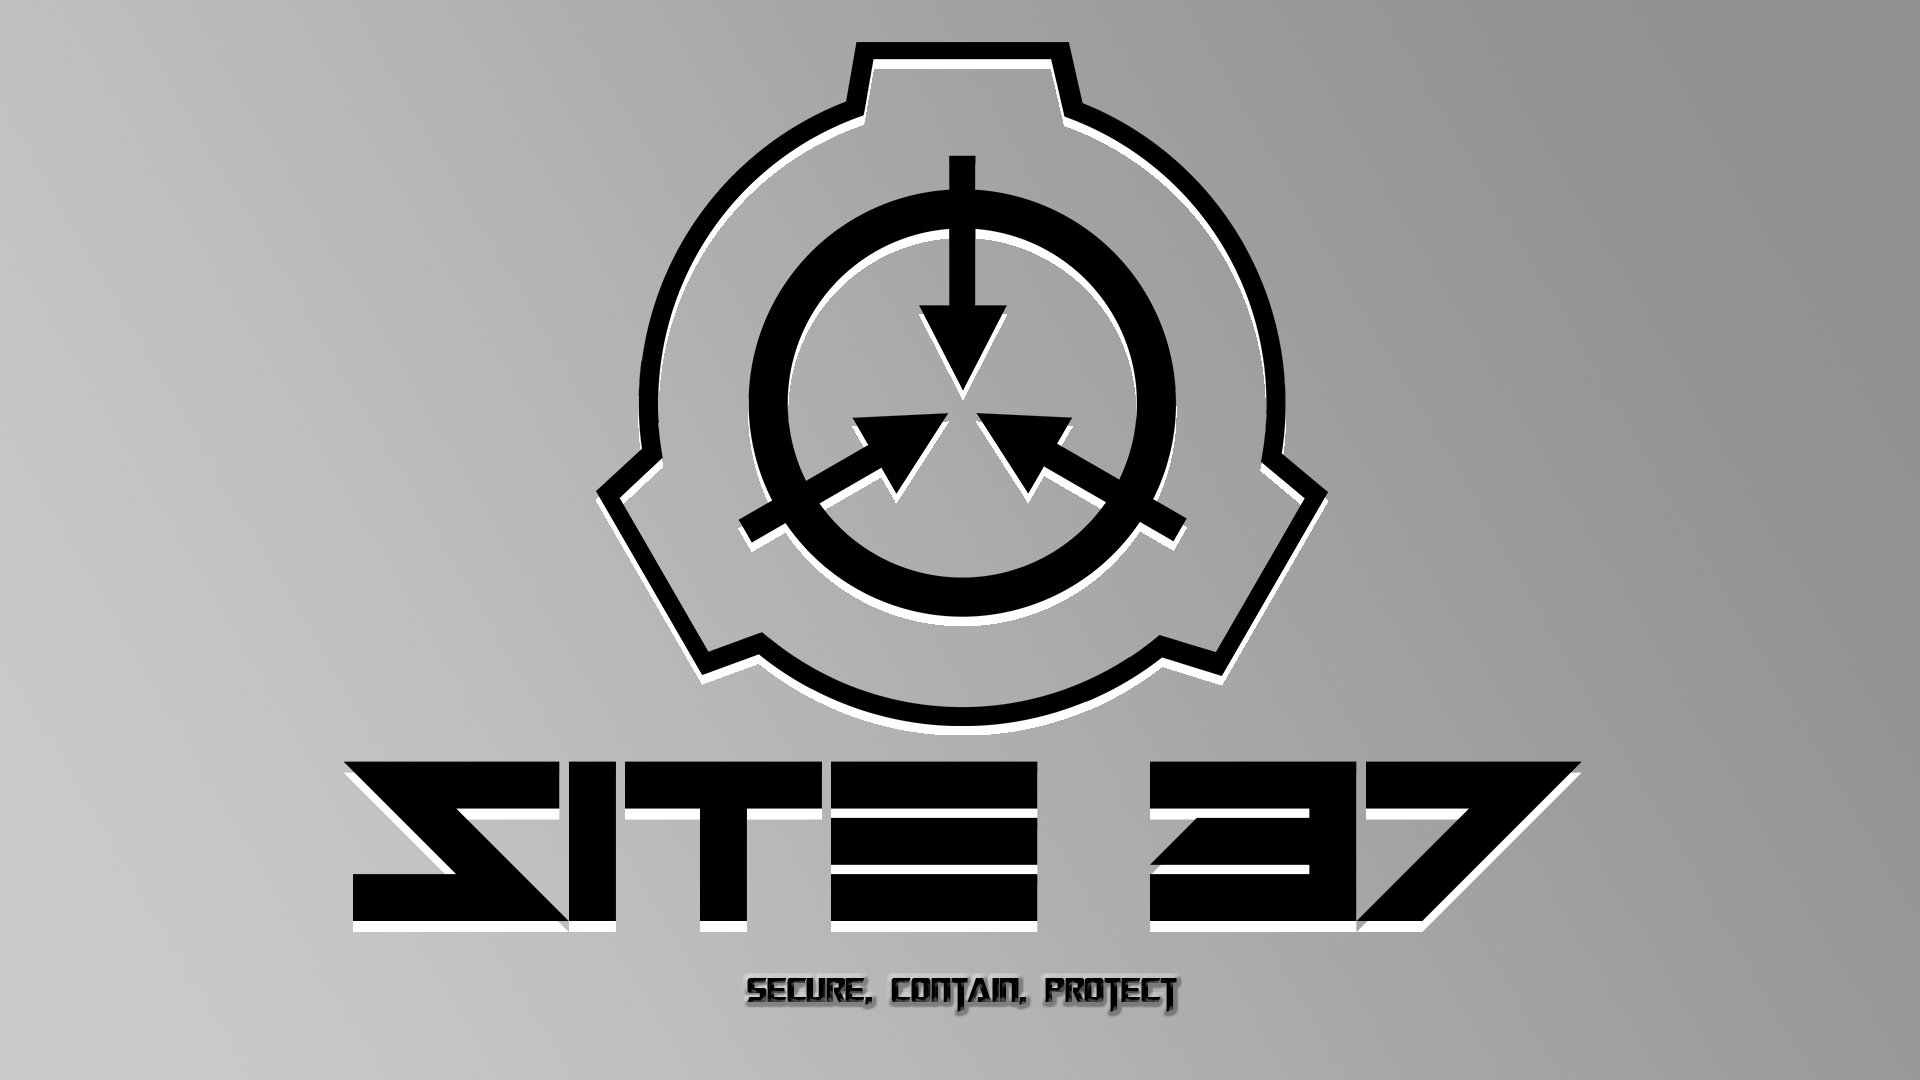 Scp, Logo HD Wallpapers / Desktop and Mobile Images & Photos